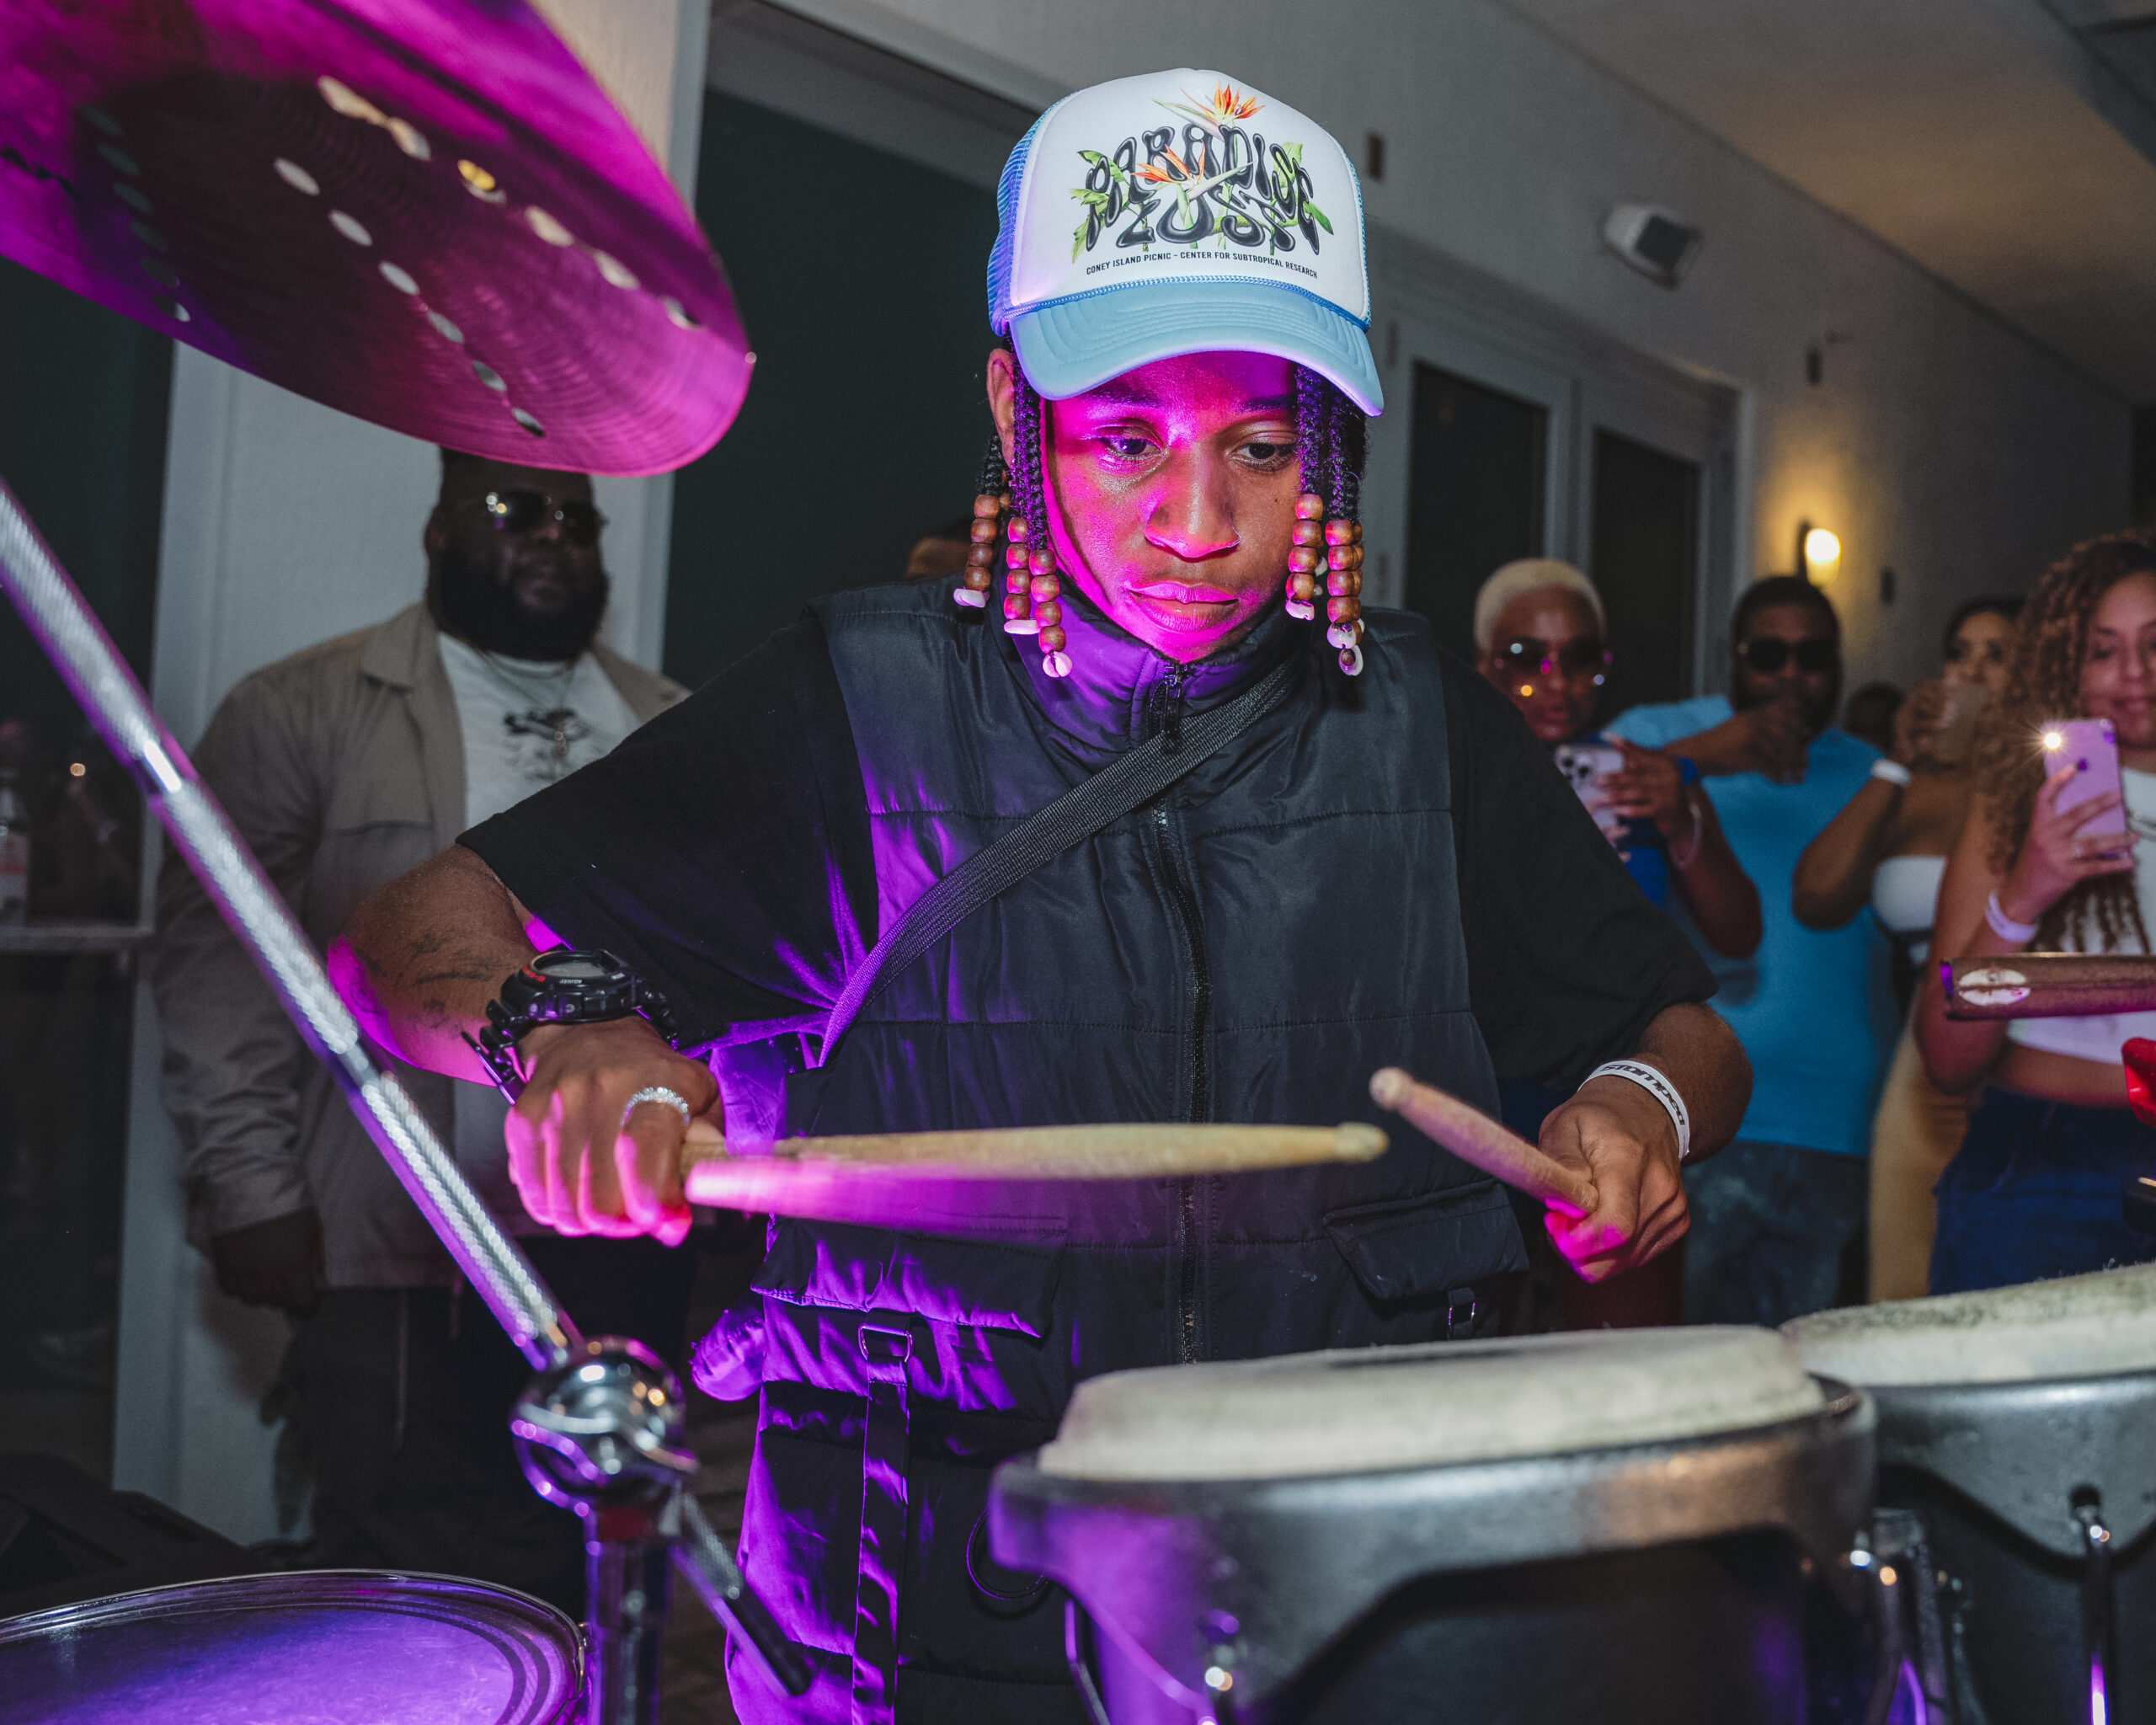 Man playing the drums with a crowd behind him